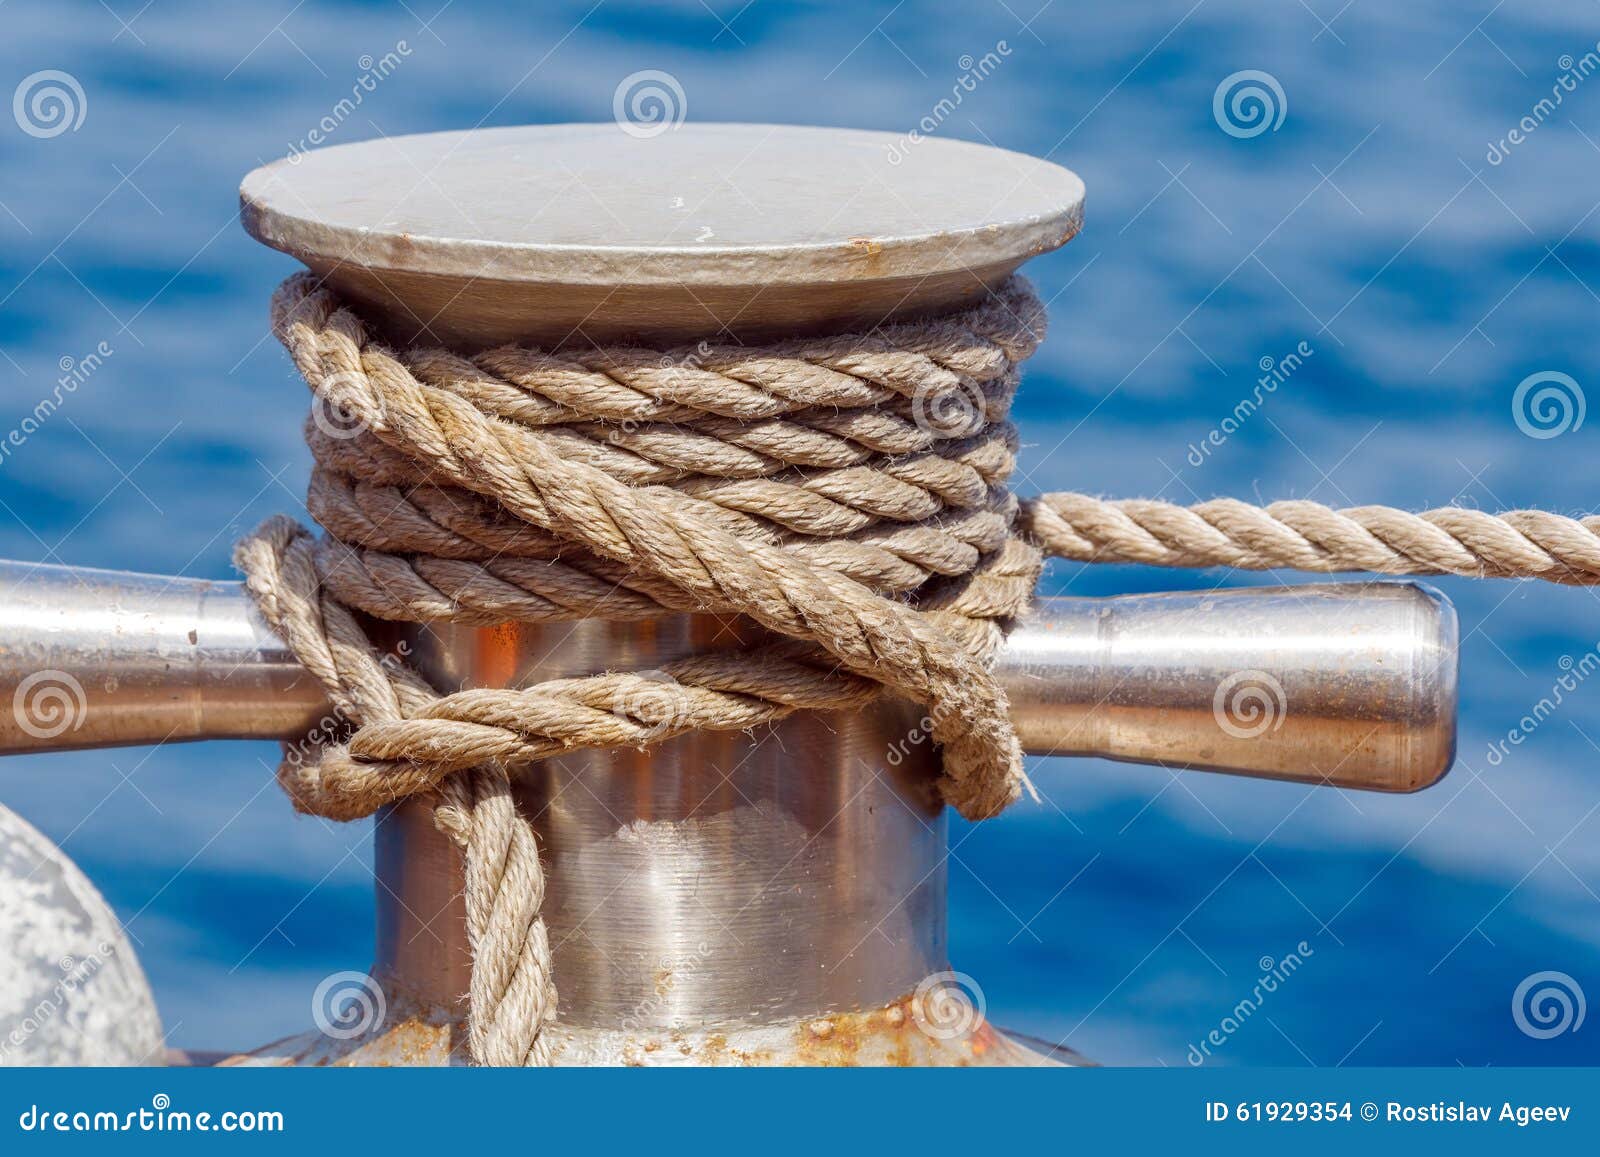 Boat Rope with Knot stock photo. Image of secure, marina - 61929354